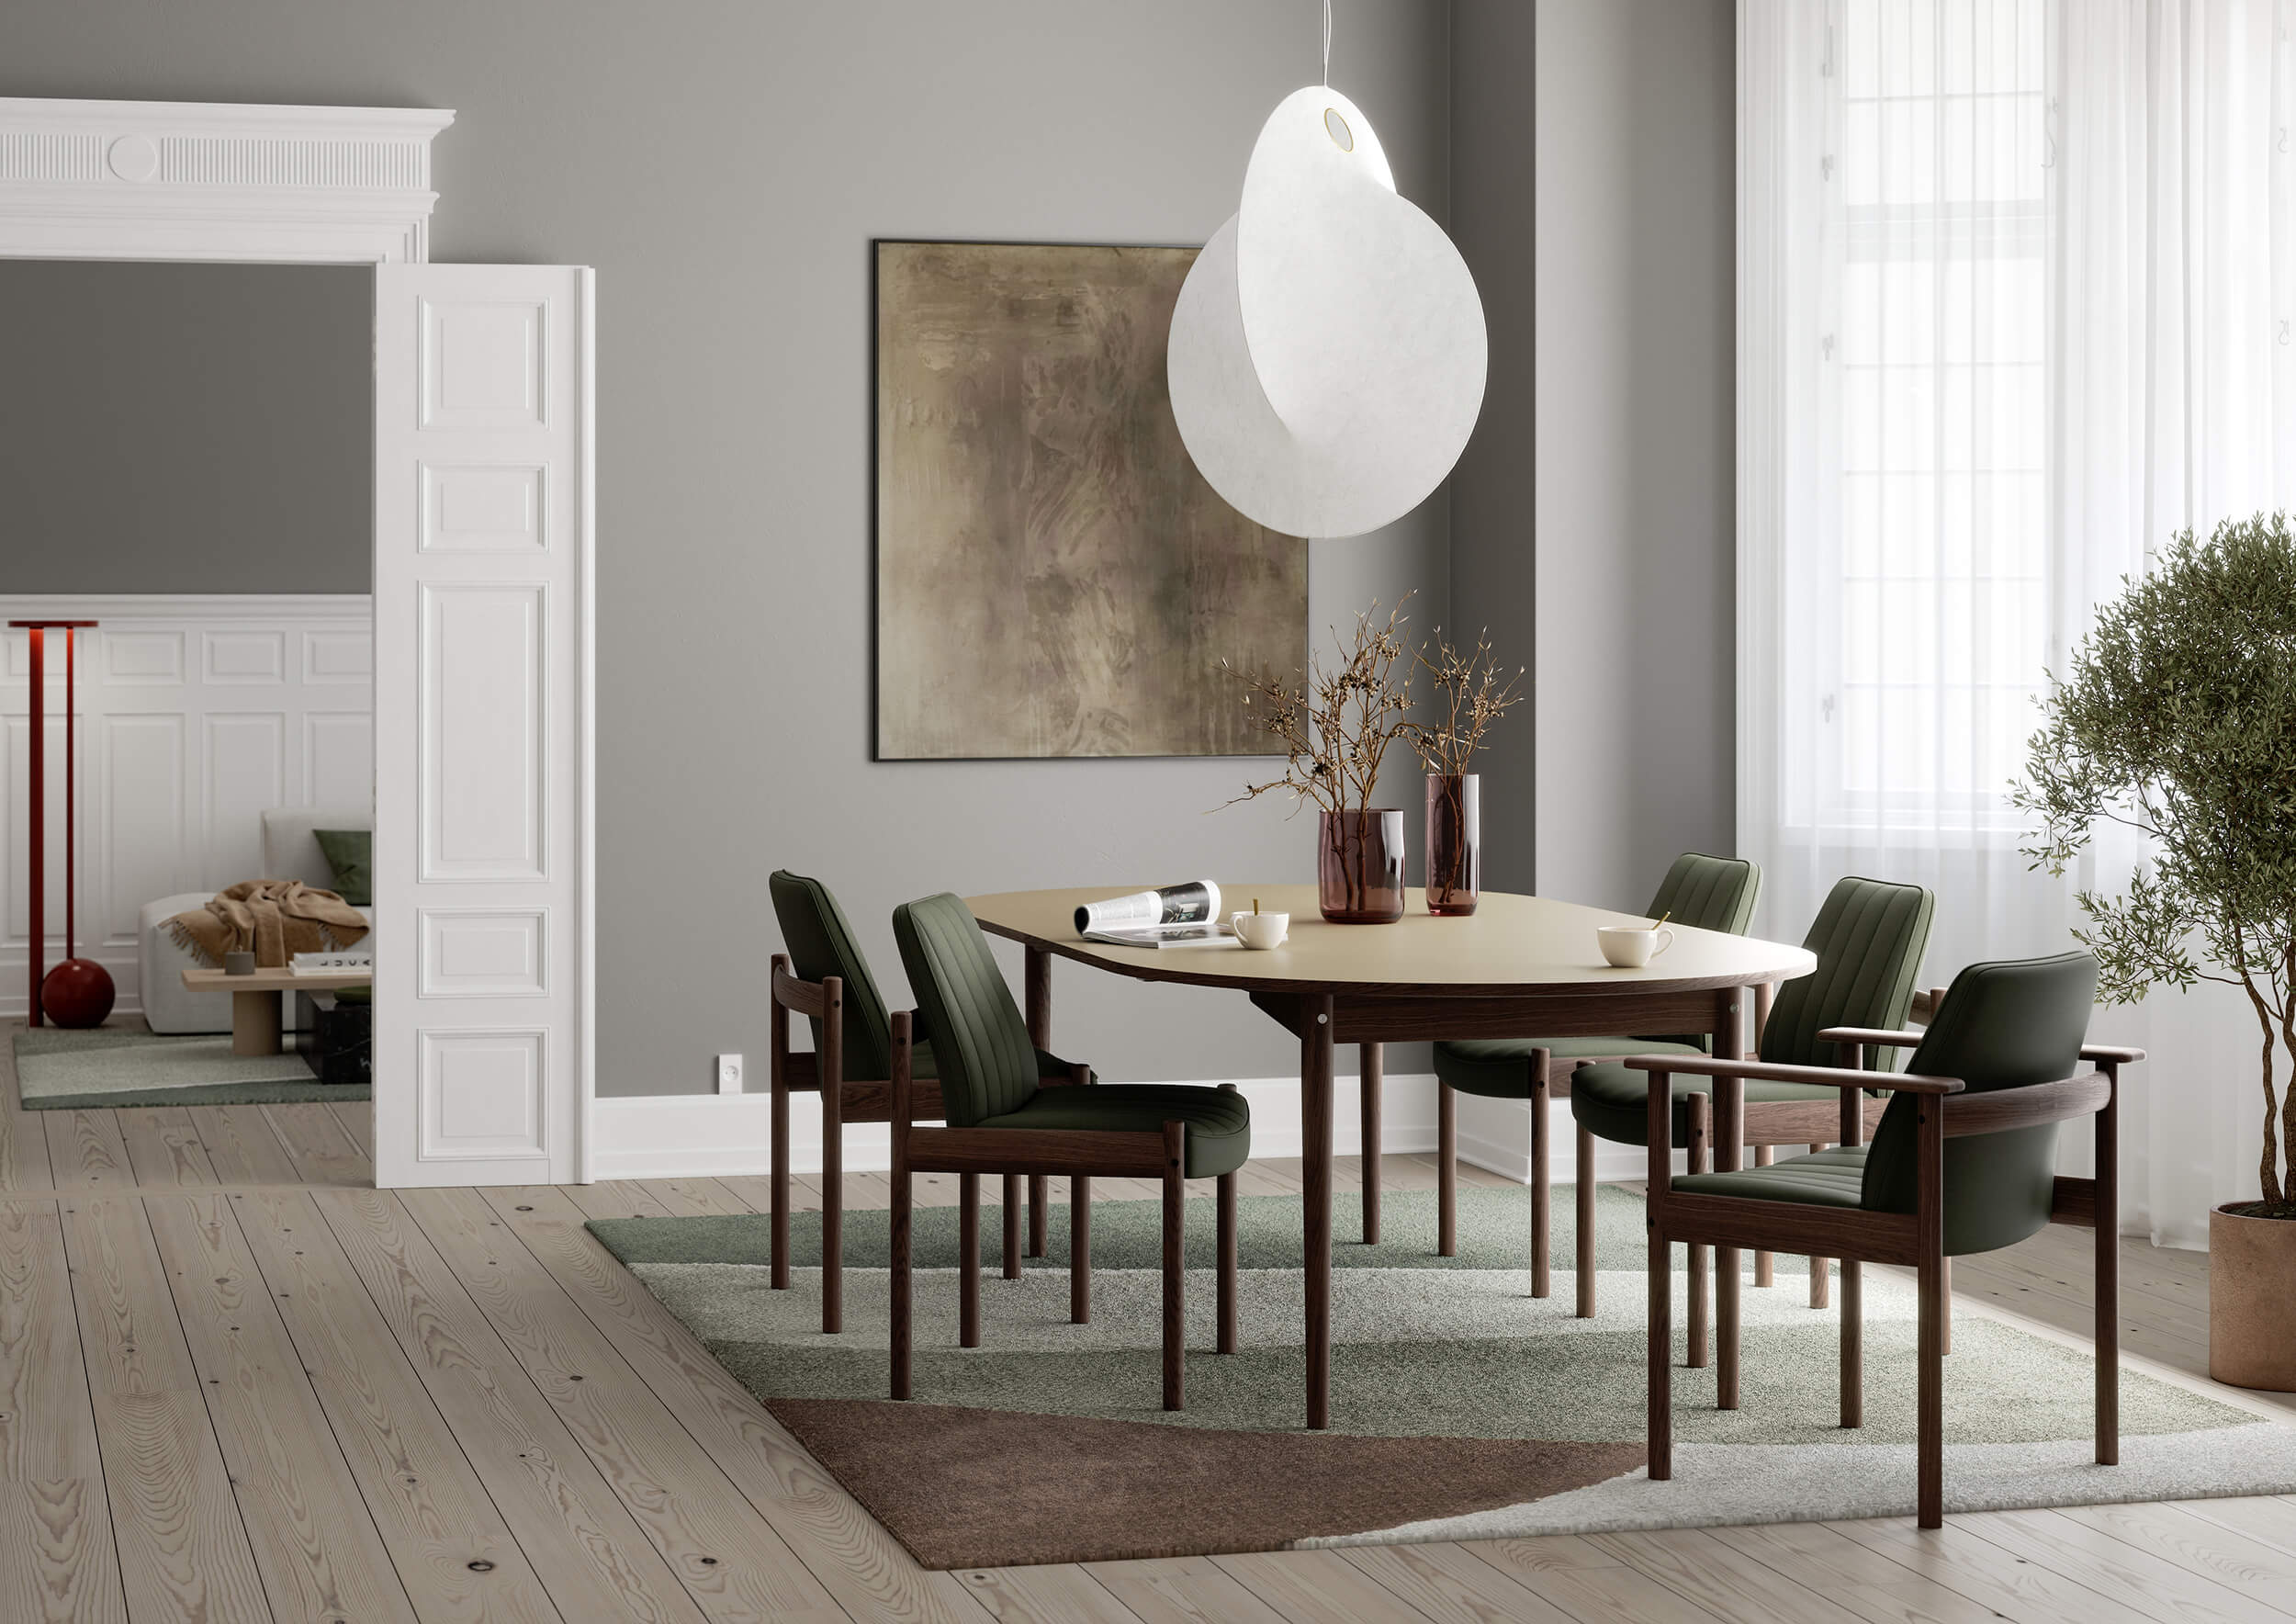 Oma dining table, Ry dining chair